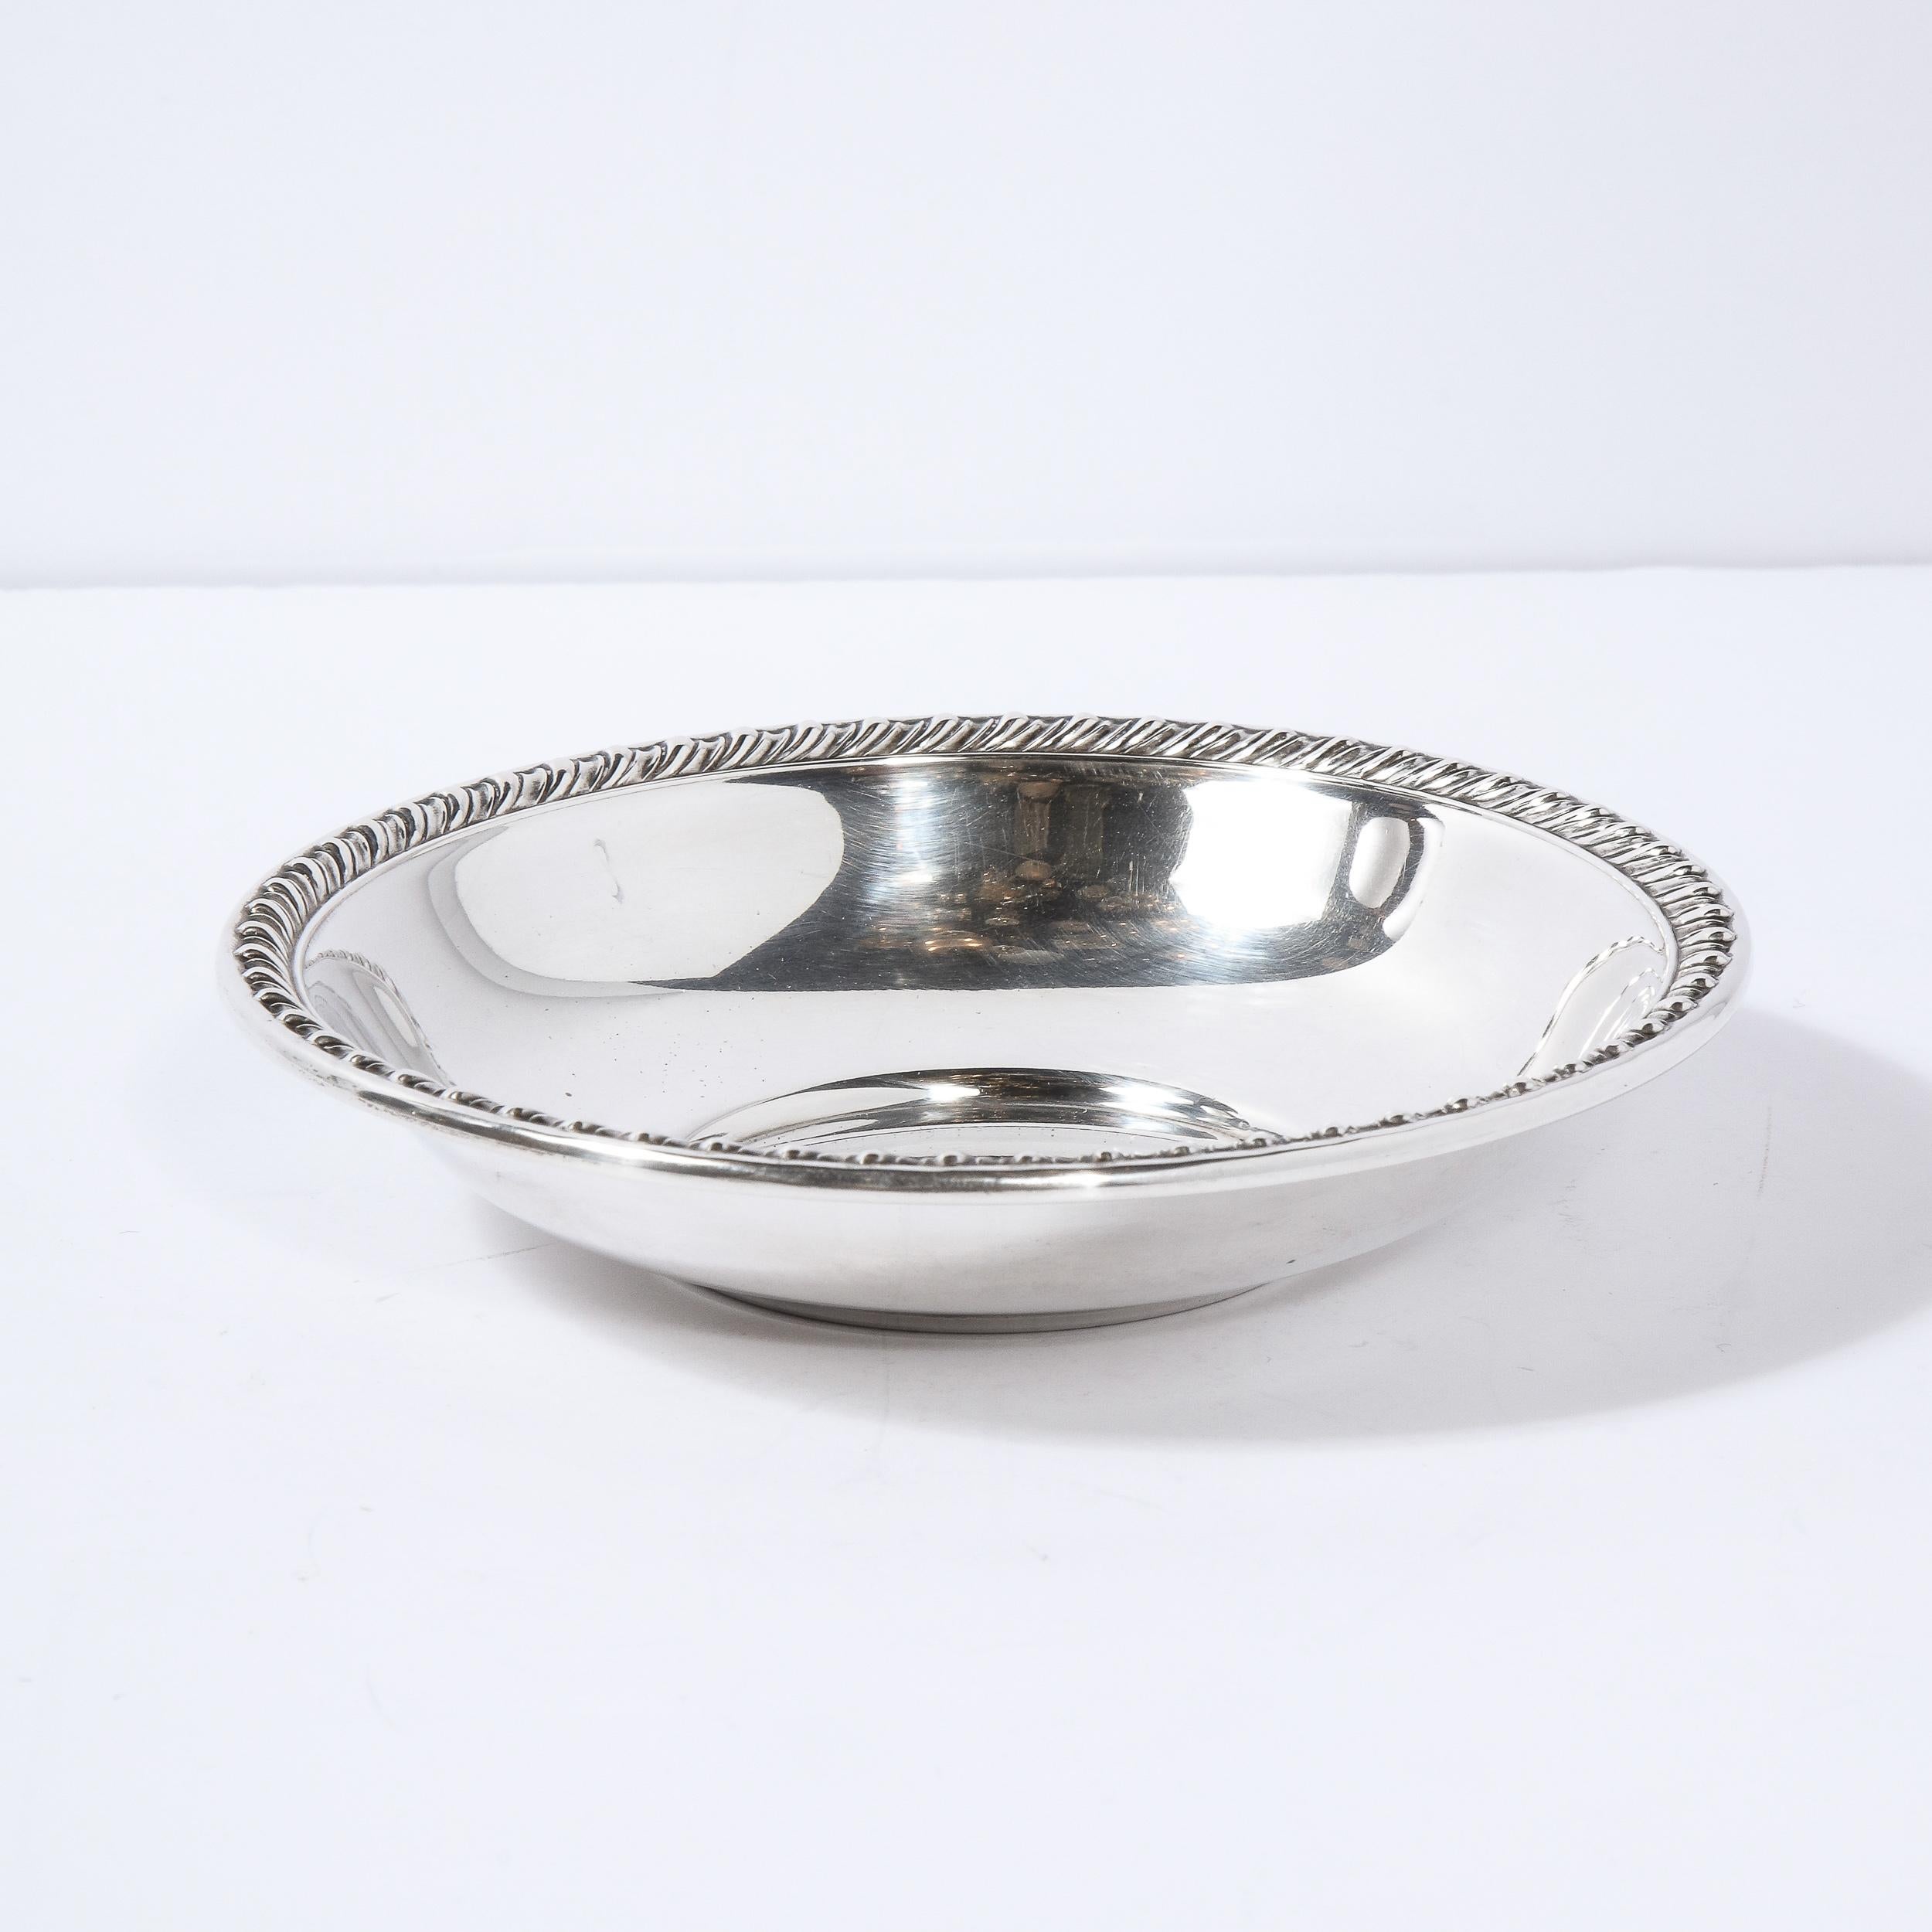 This elegant sterling silver dish was realized in the United States. It features an austere concave form with angled sides and a beaded border. With its clean modernist lines and beautiful quality, this piece would be a winning addition to any style